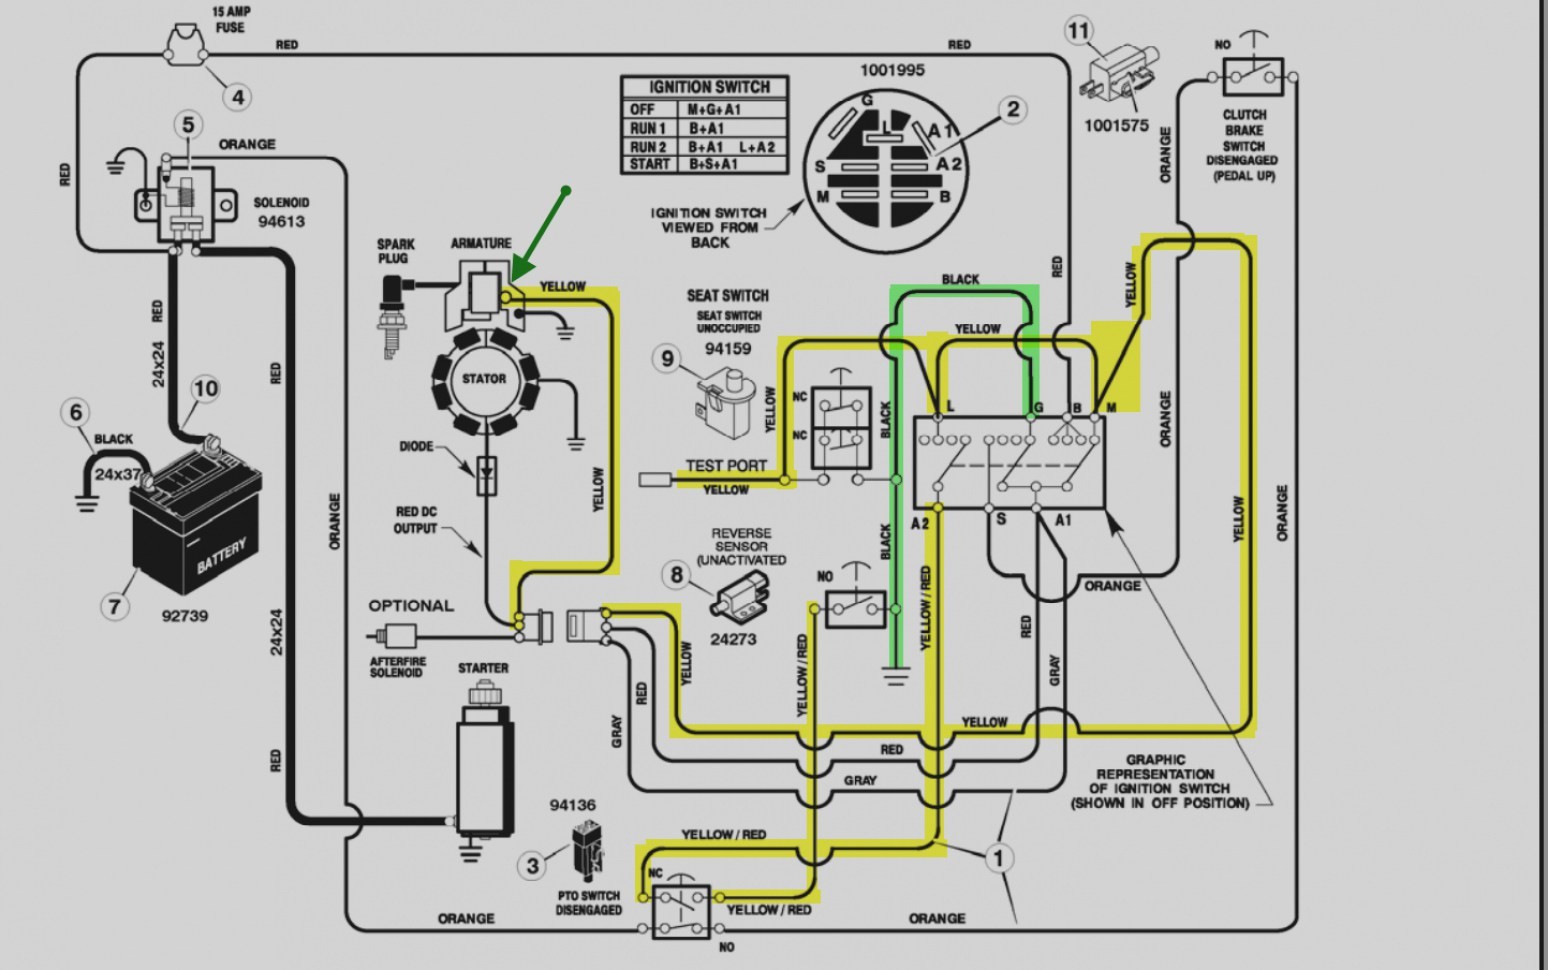 mower ignition switch wiring diagram briggs and stratton 16 hp rh poscaribe co Oil Briggs and